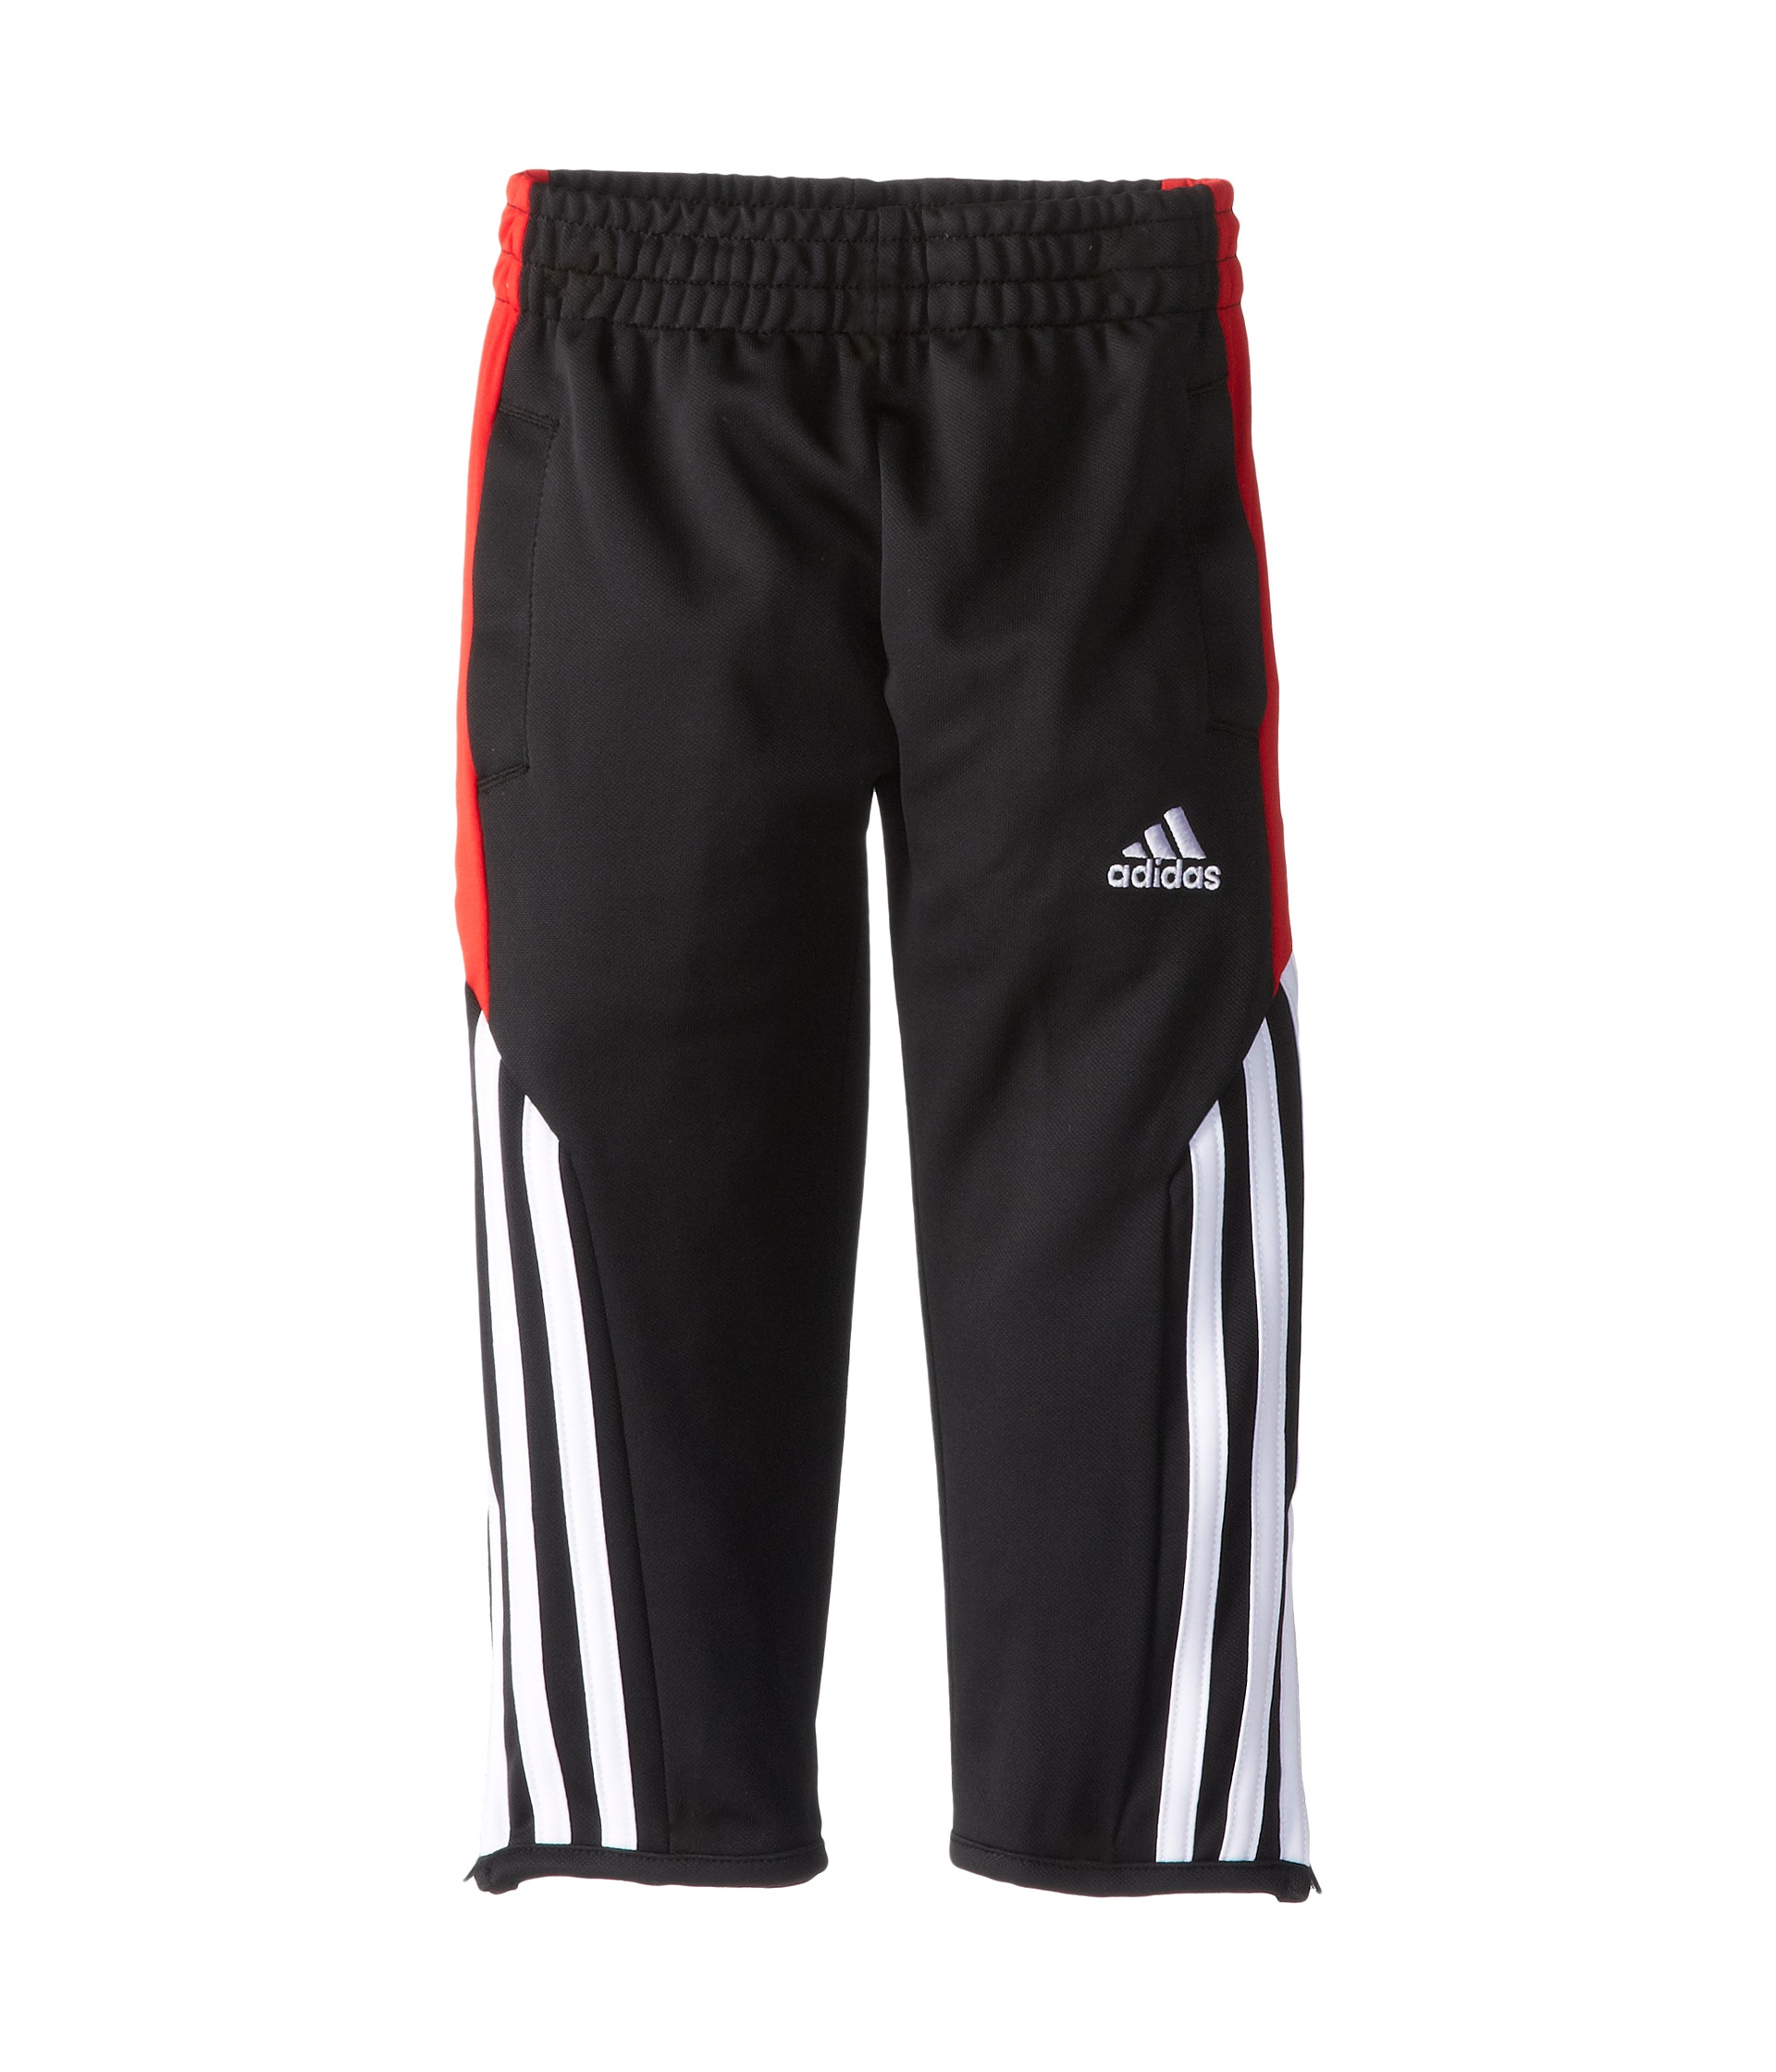 adidas Kids Clima Soccer Pant (Toddler/Little Kids) - Zappos.com Free ...